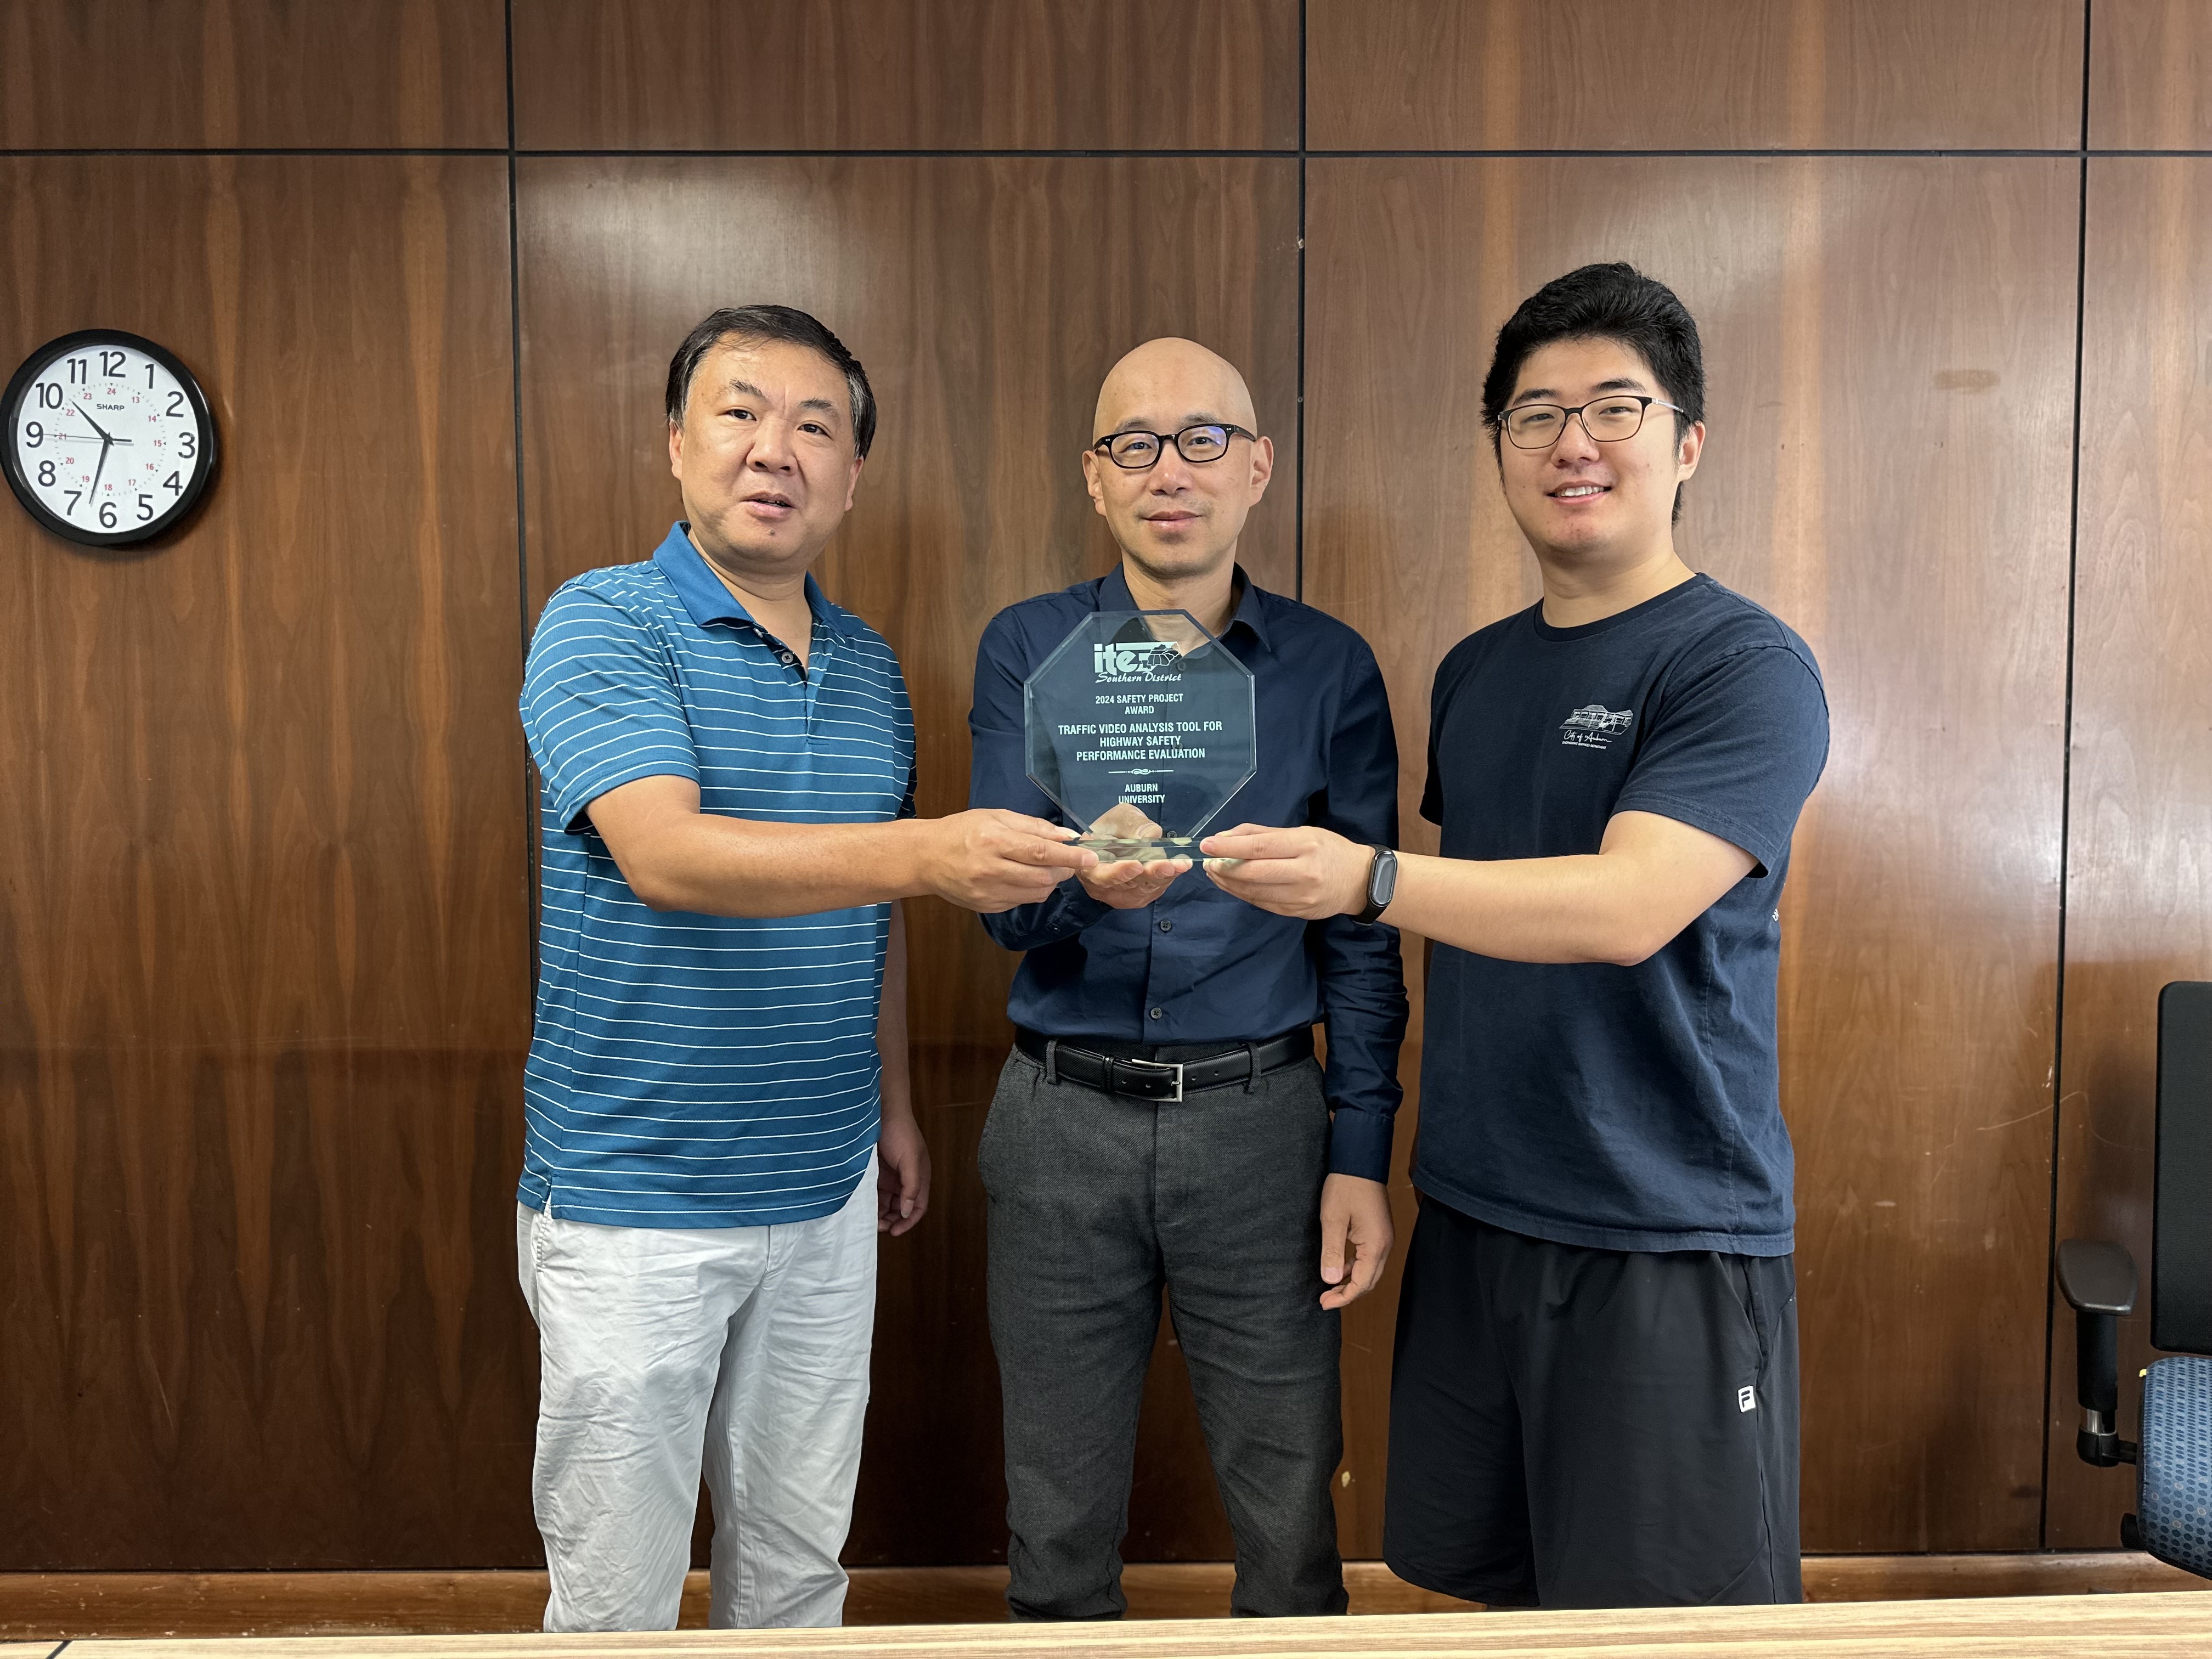 Yang Zhou,  Huaguo Zhou and Alex Zhao present their Special Project Award on Traffic Safety at the Southern District Institute of Transportation Engineers.